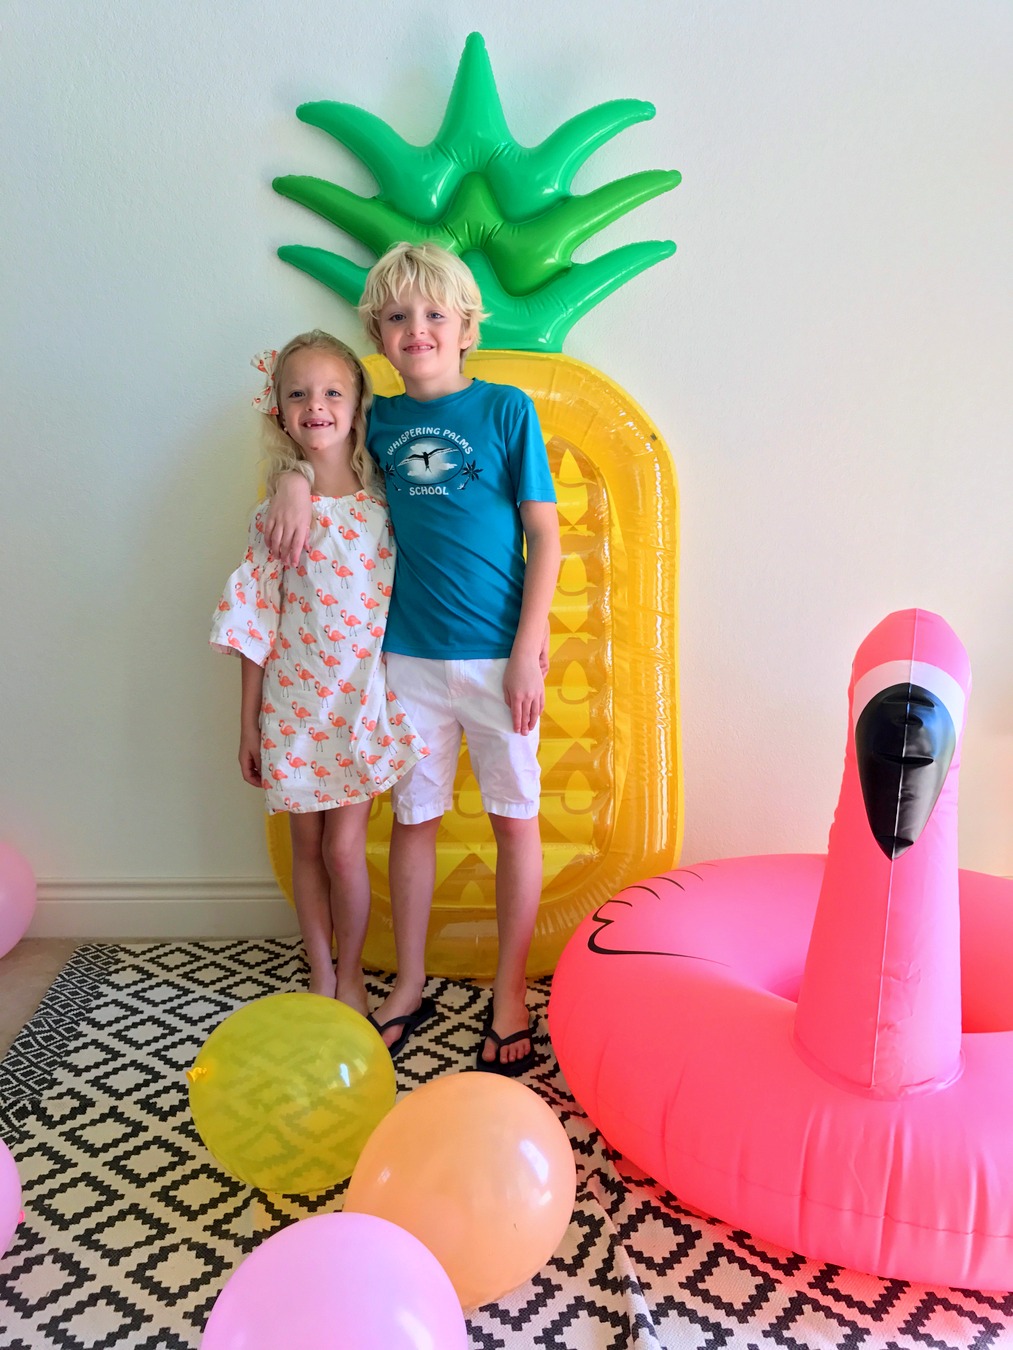 Moana kid's birthday party (with tons of pineapple party decor and a luau vibe)